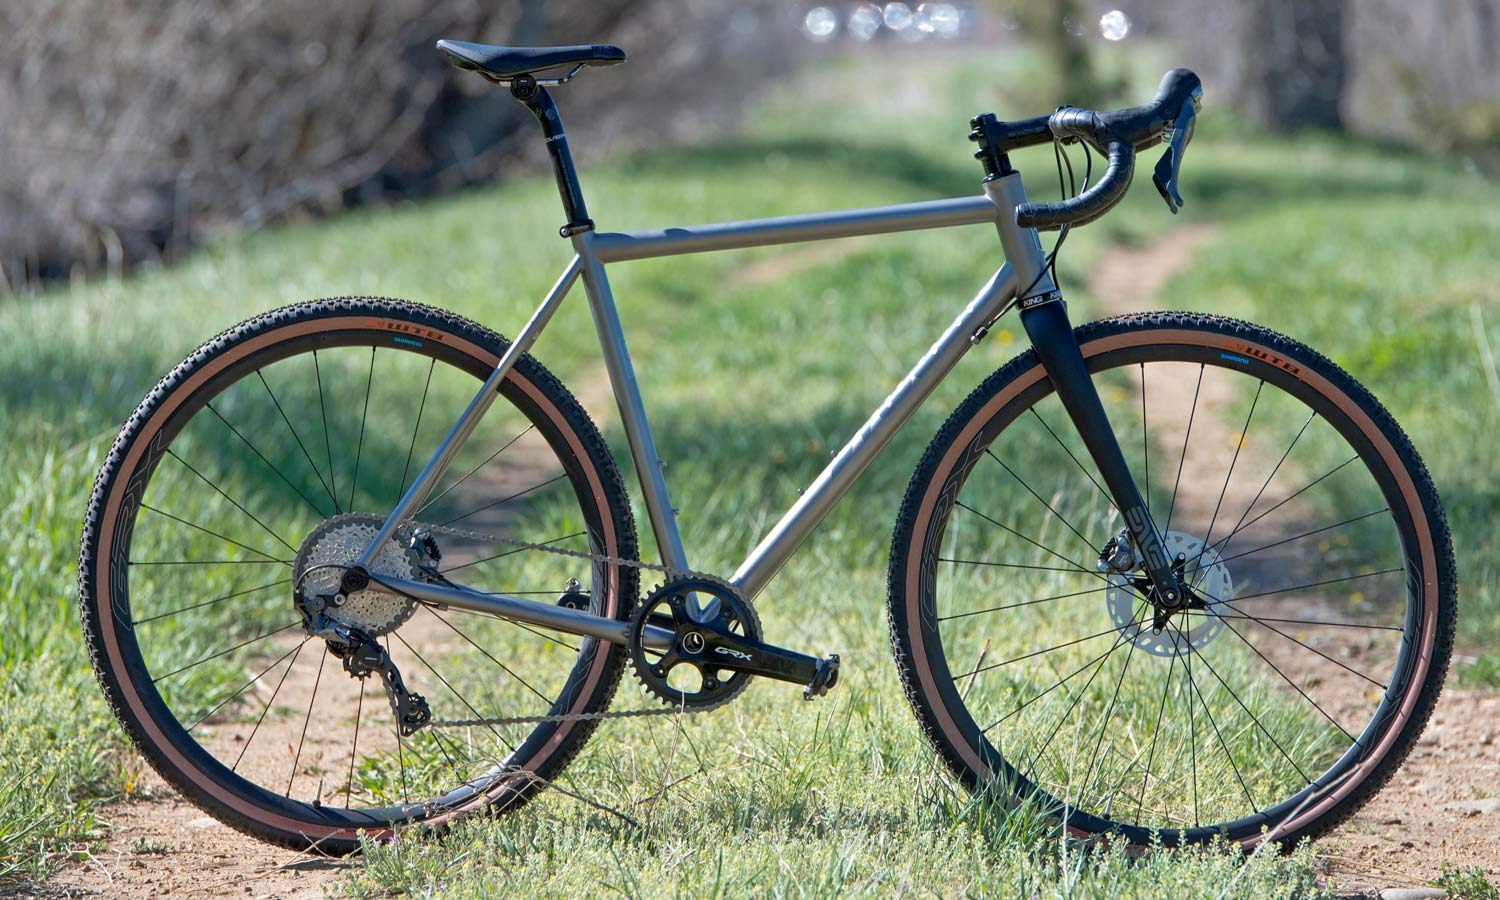 Mosaic stock Gravel Series bike_US-made handcrafted gravel all-road bikes